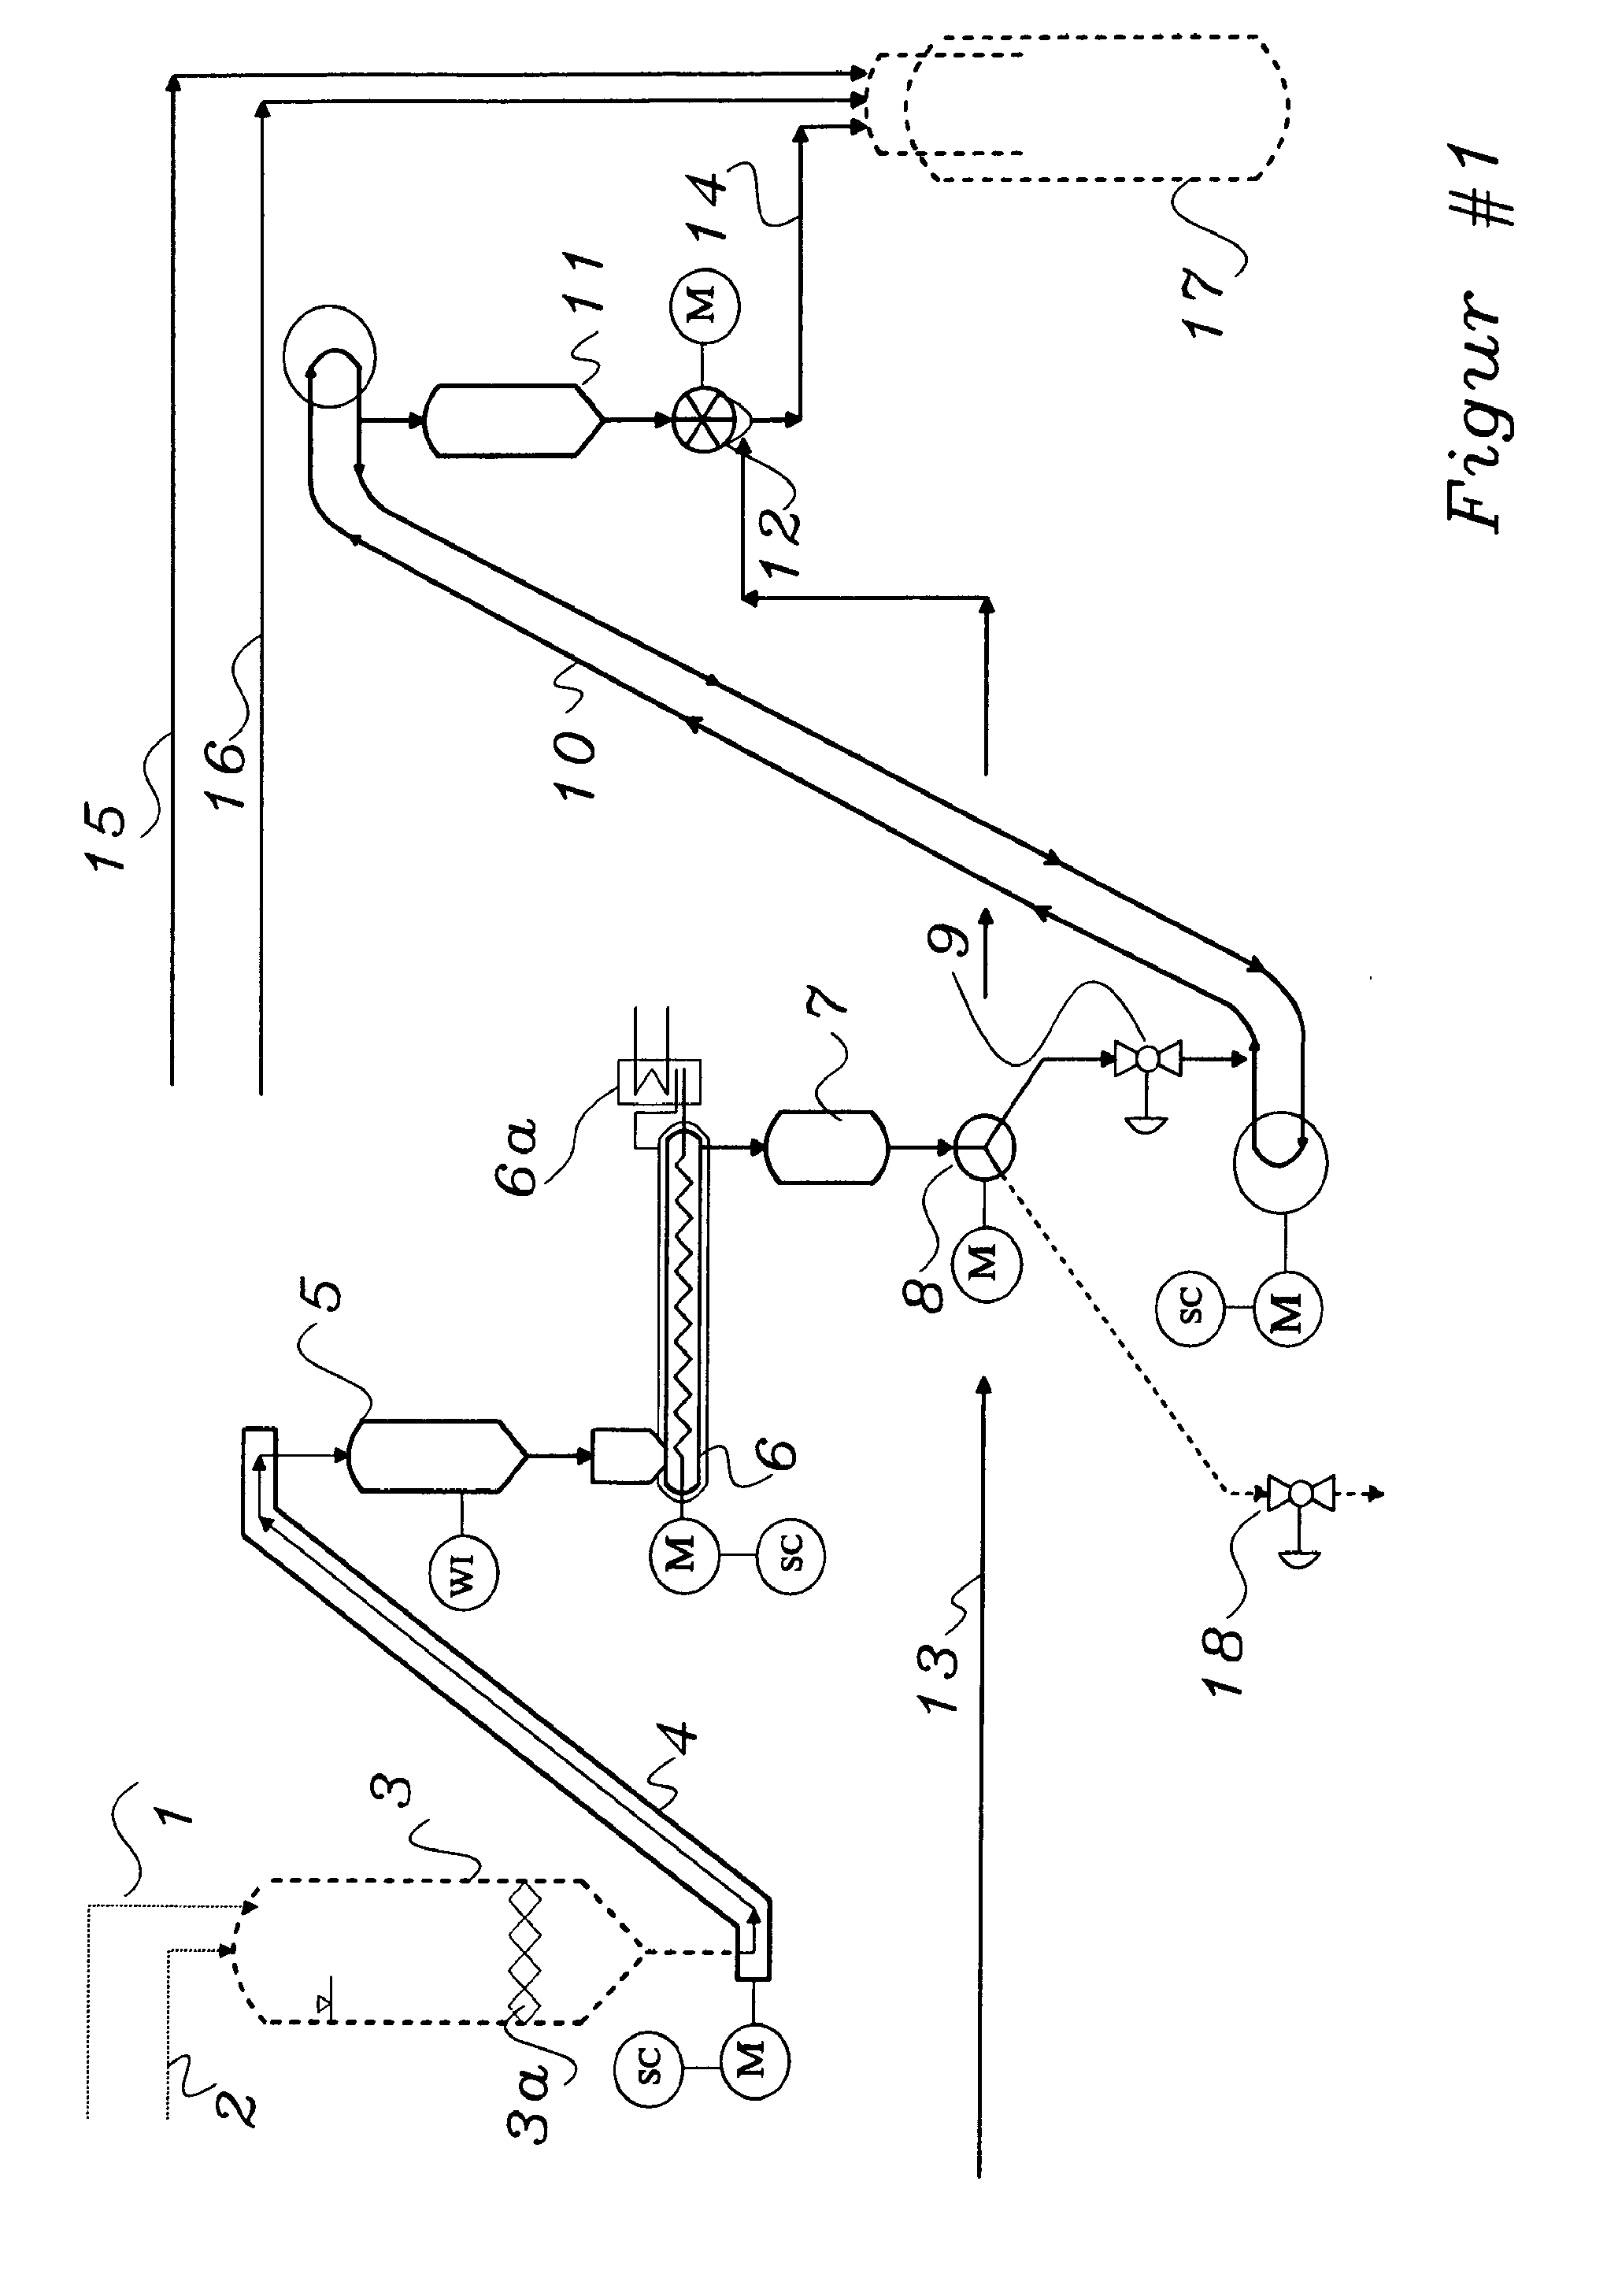 Process for continuous dry conveying of carbonaceous materials subject to partial oxidization to a pressurized gasification reactor